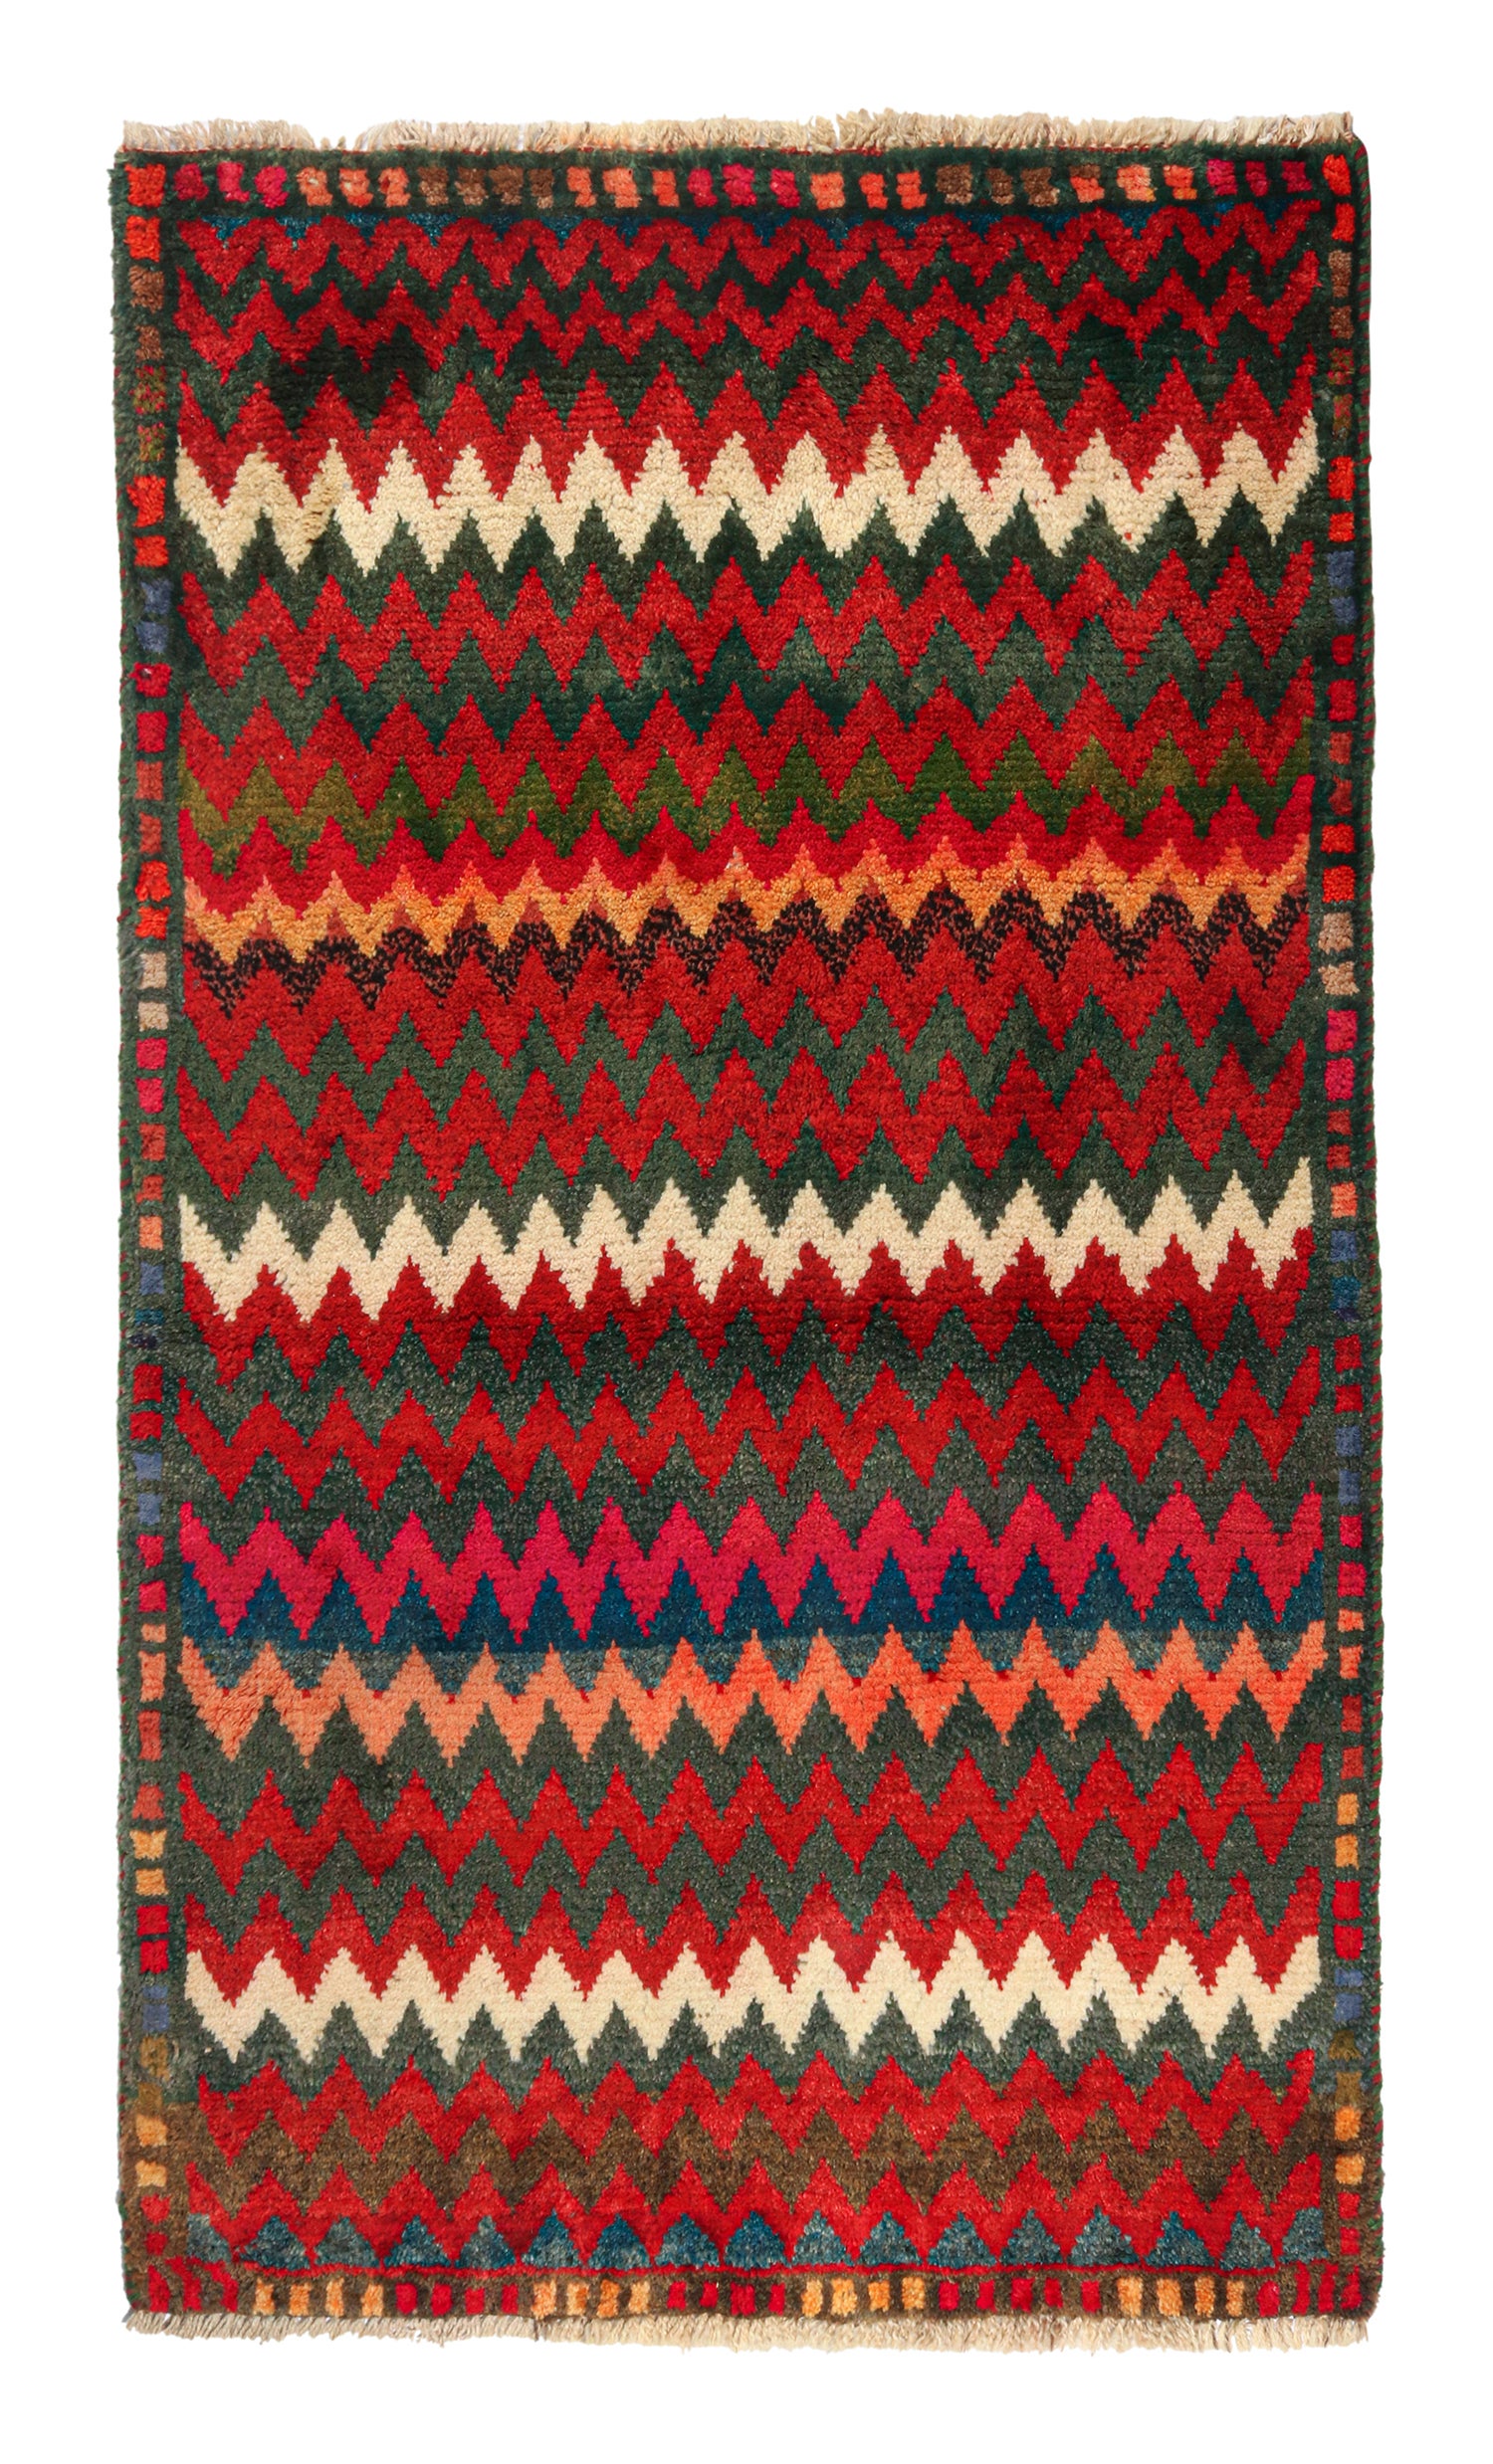 Vintage Gabbeh Persian Tribal Rug in Vibrant Chevron Patterns by Rug & Kilim For Sale